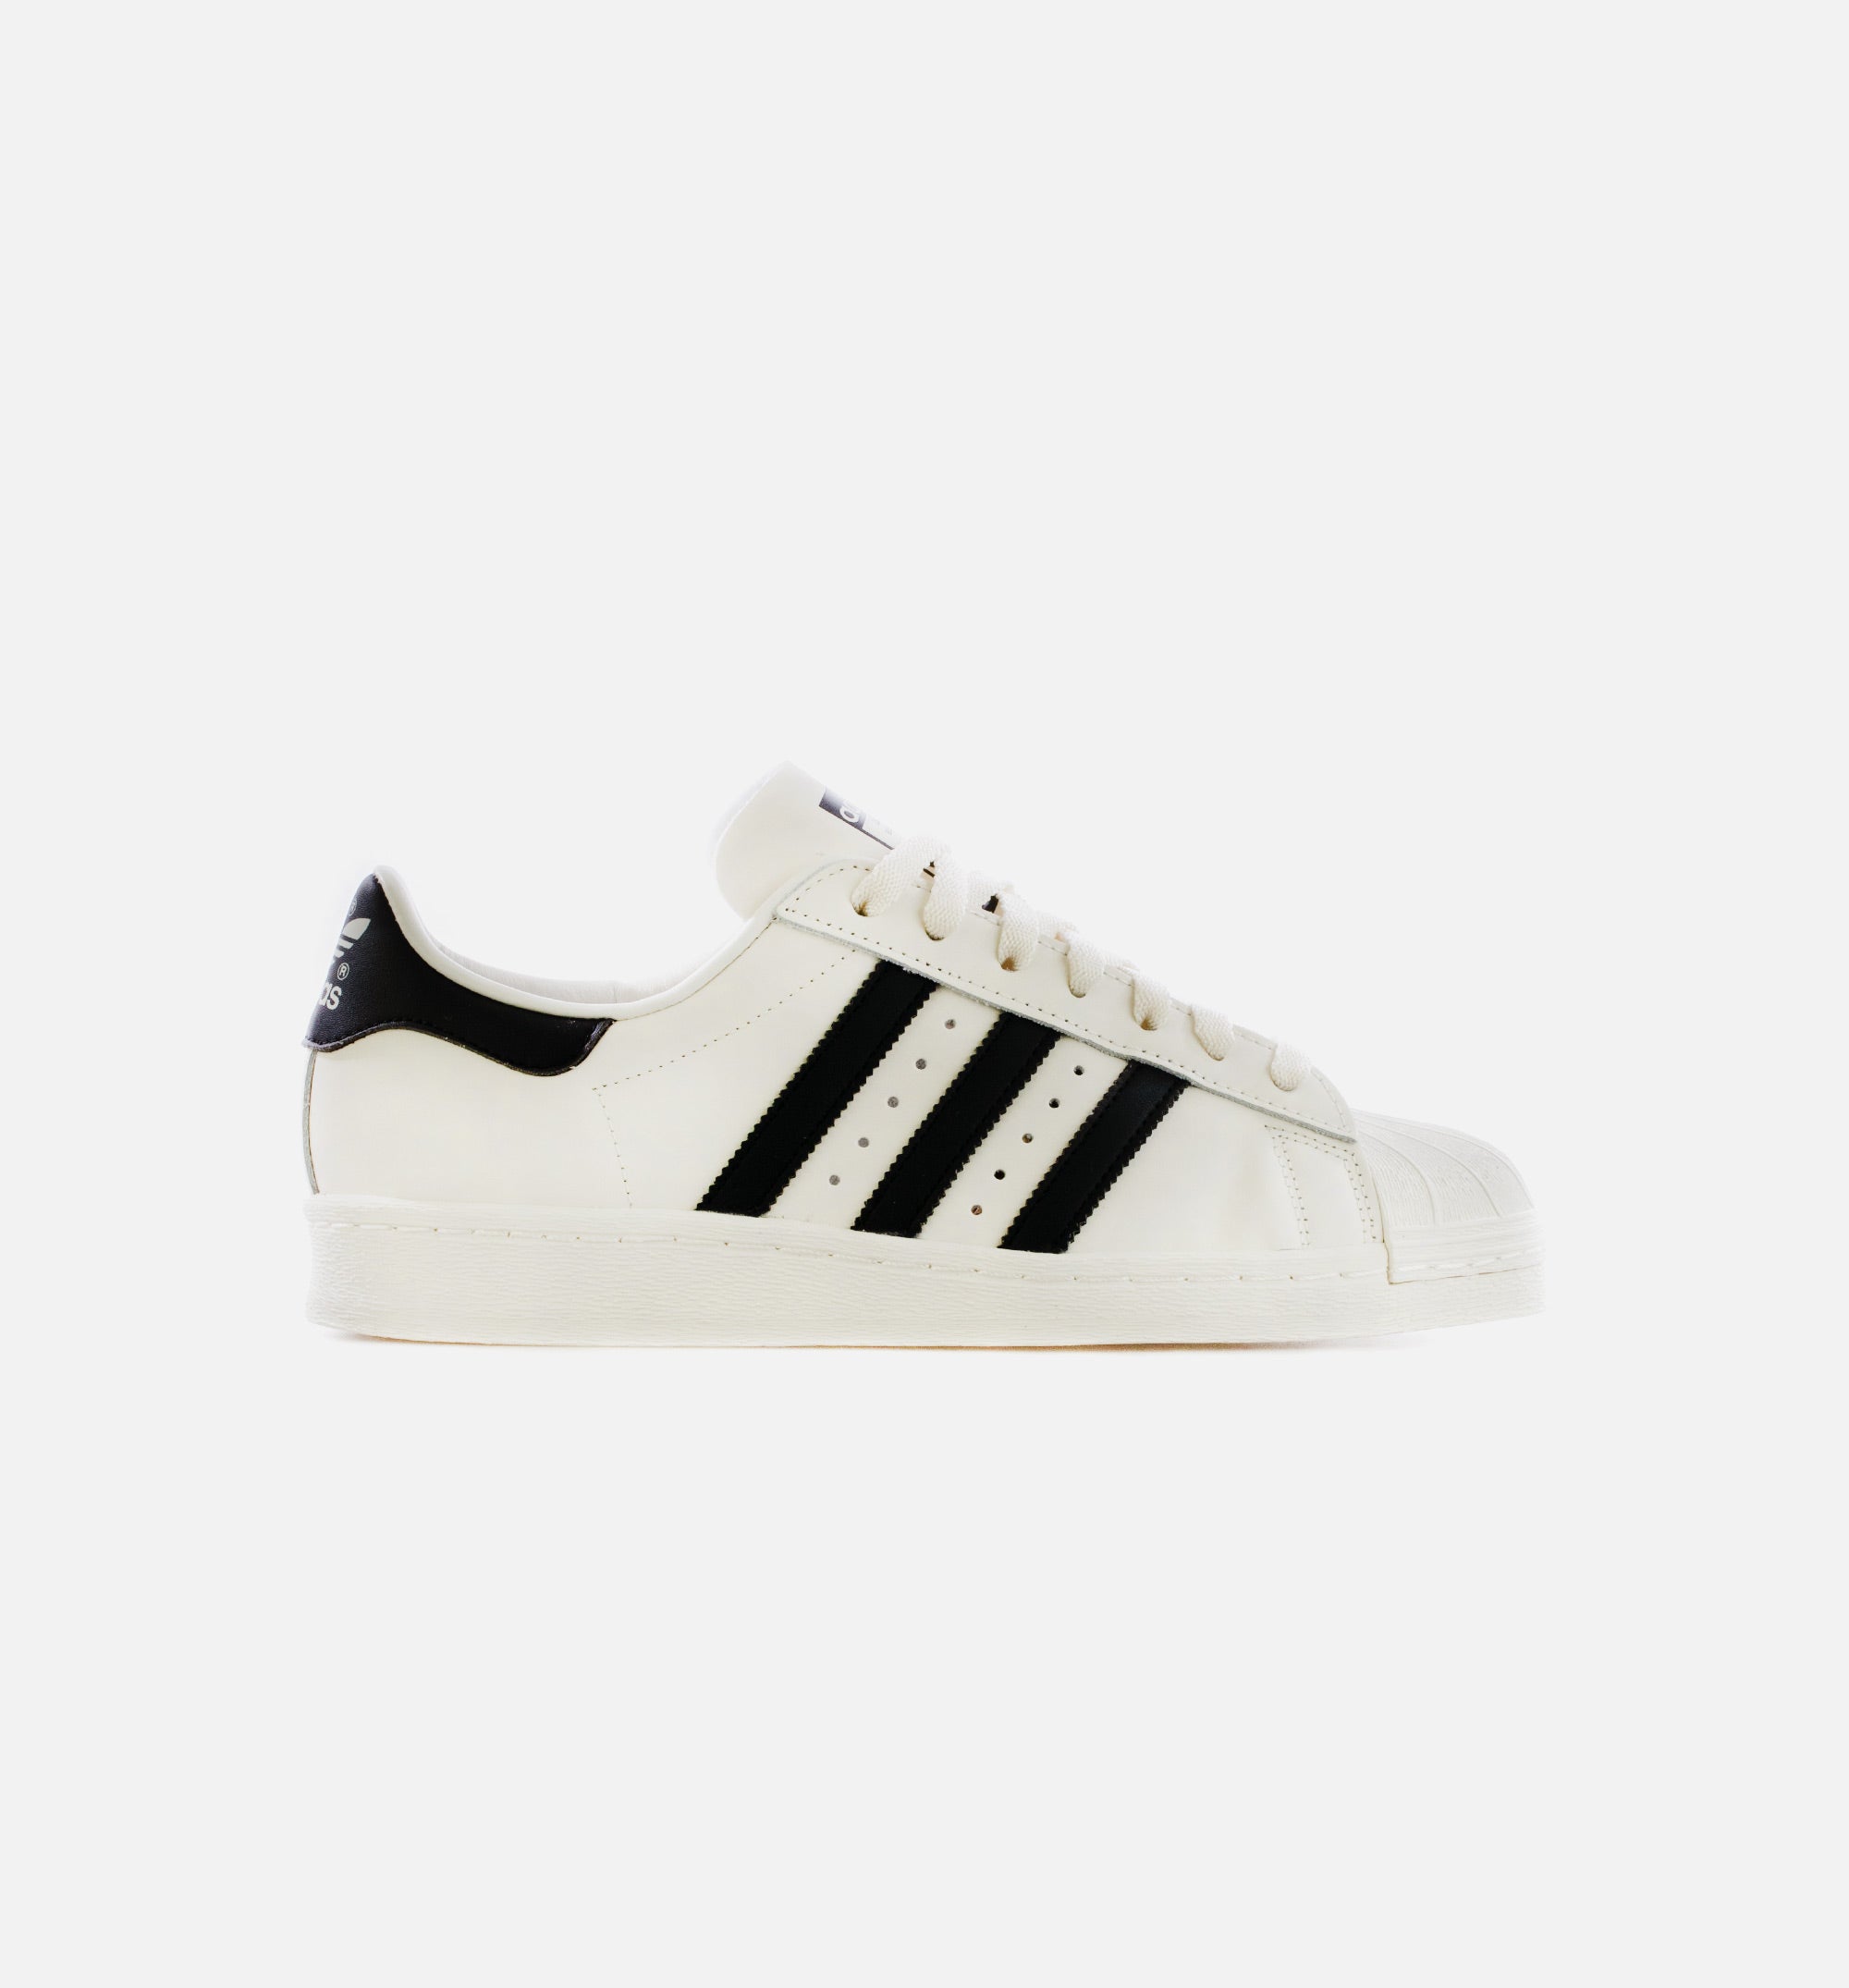 Adidas Superstar (Cloud White/Core Black/Green) - Style Code: ID4670 